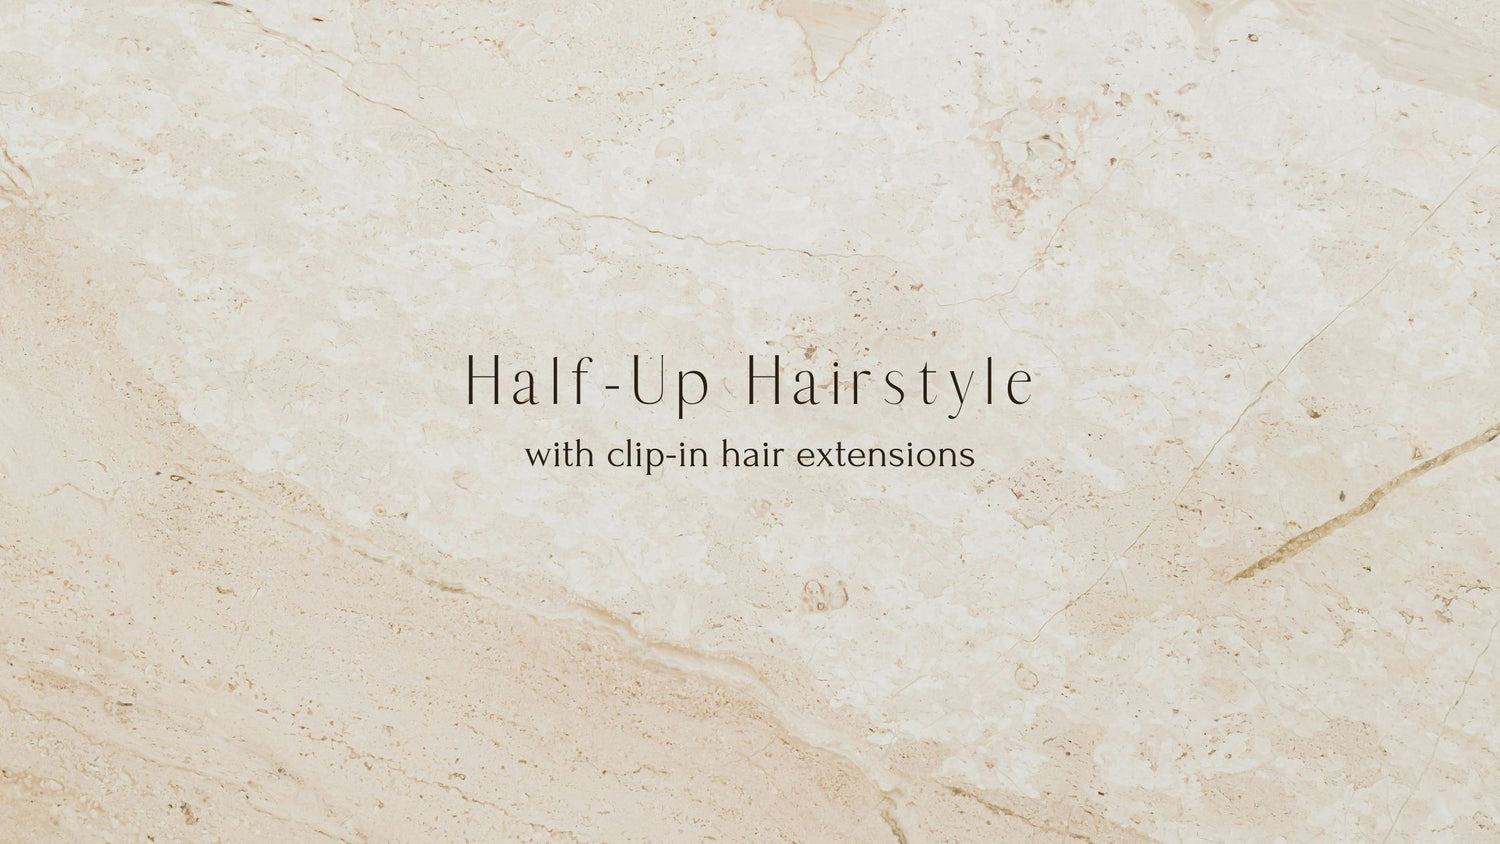 Frontrow clip-in hair extensions blog banner that reads: Half-up hairstyle with clip-in hair extensions